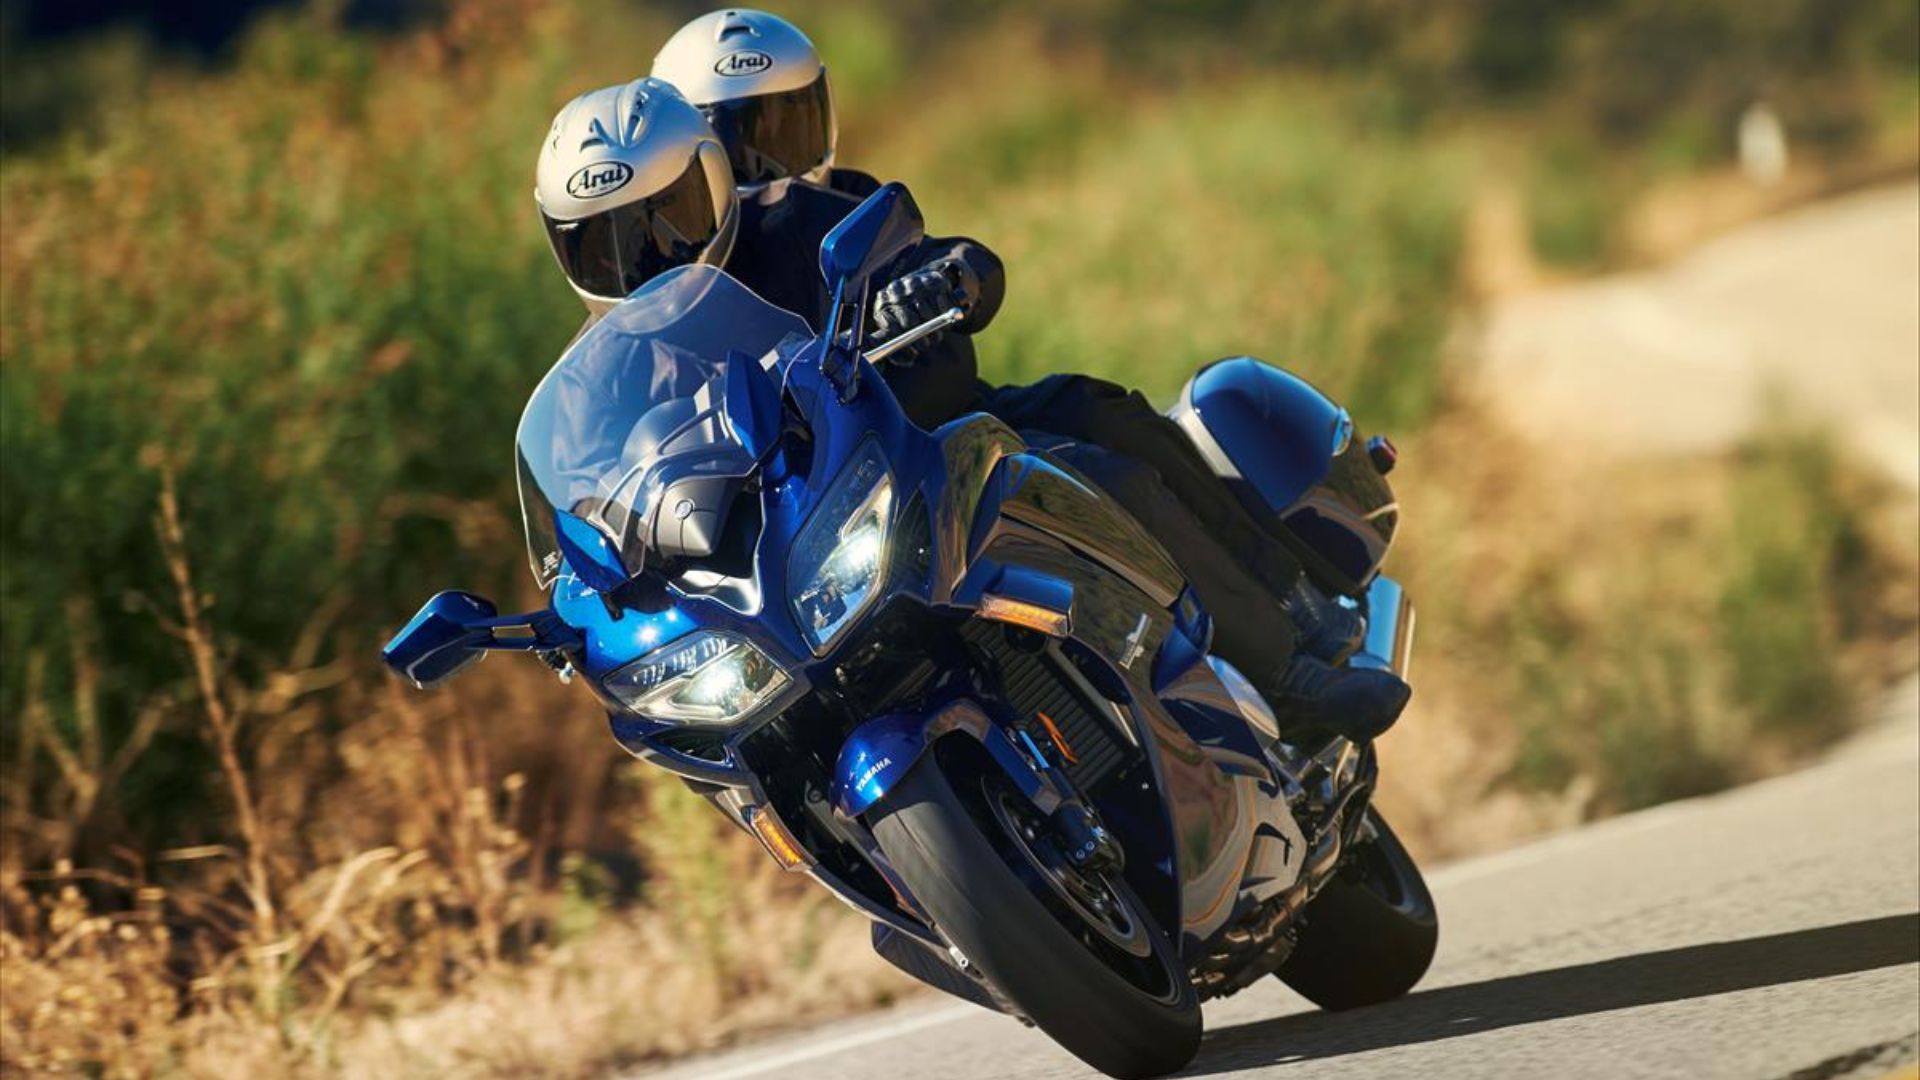 10 things yamaha owners love about their bikes